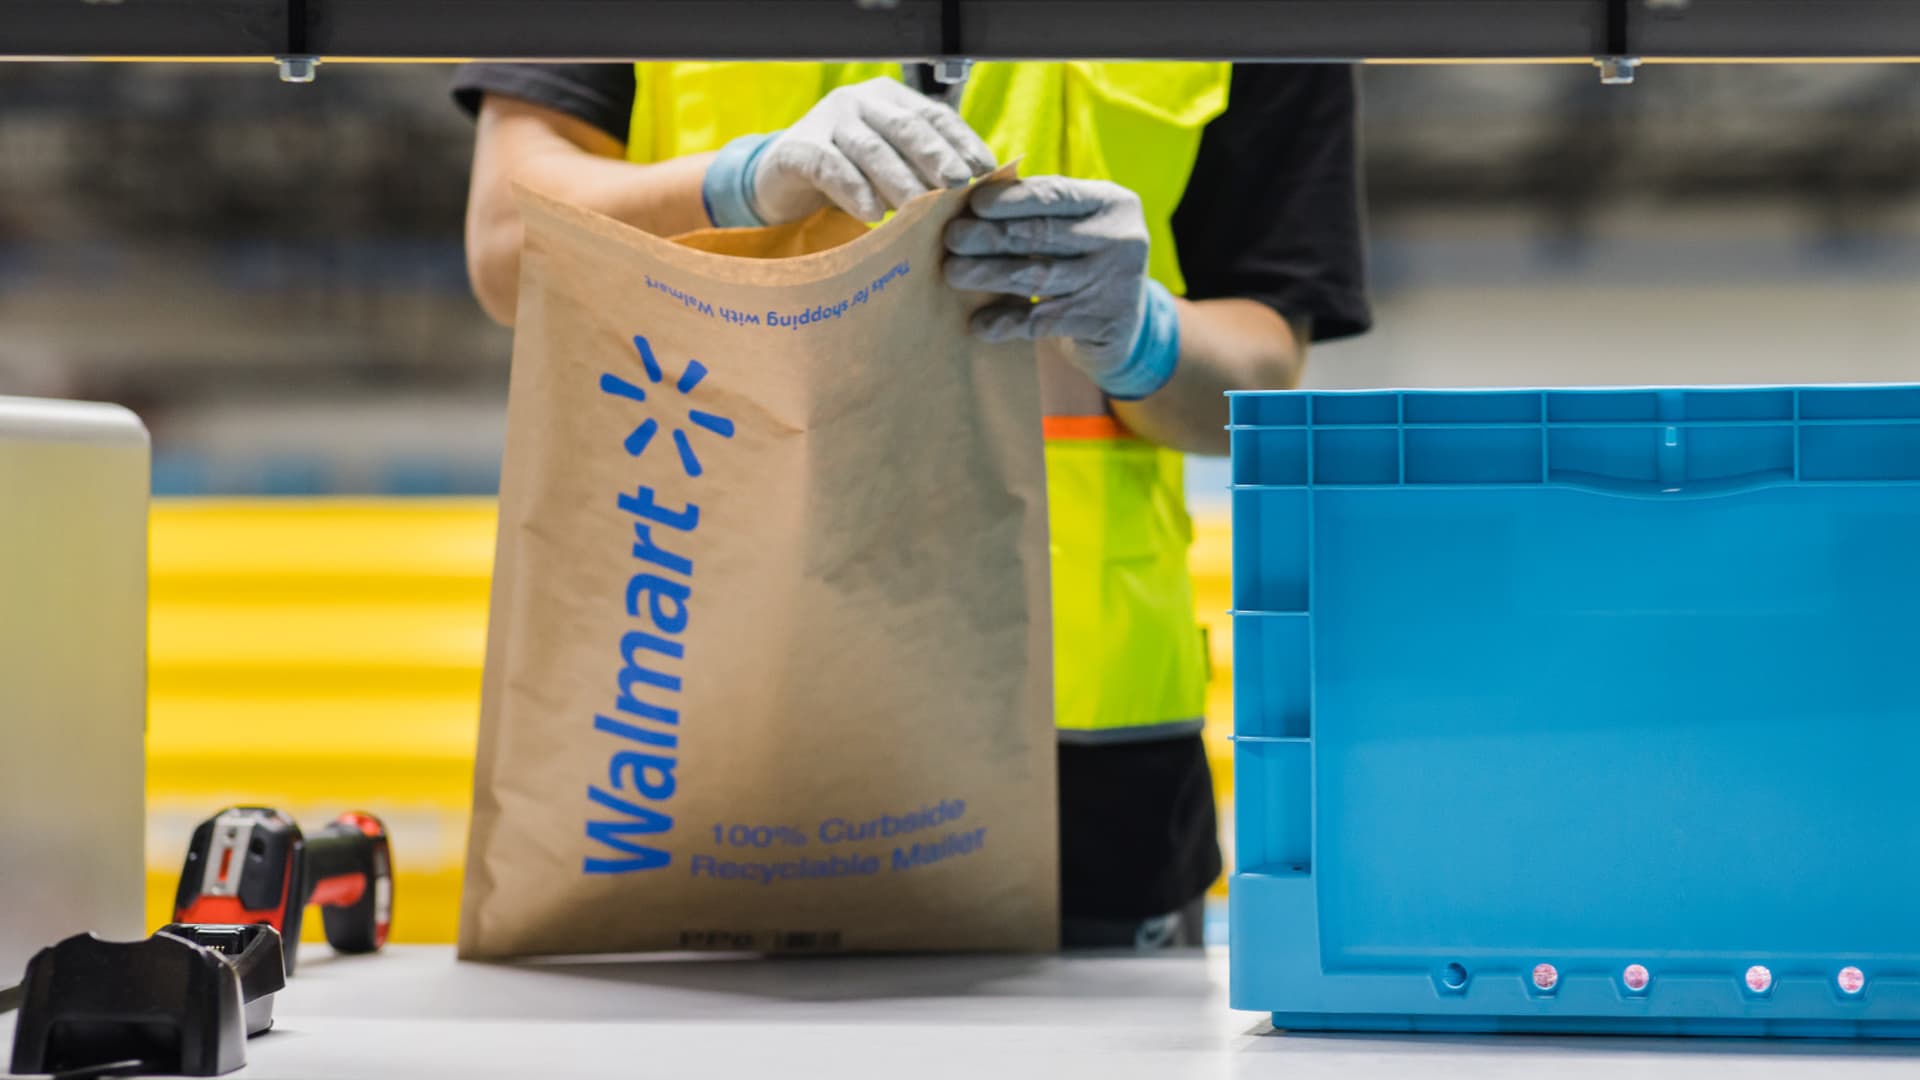 Walmart is swapping out plastic mailers for paper mailers that customers can recycle.